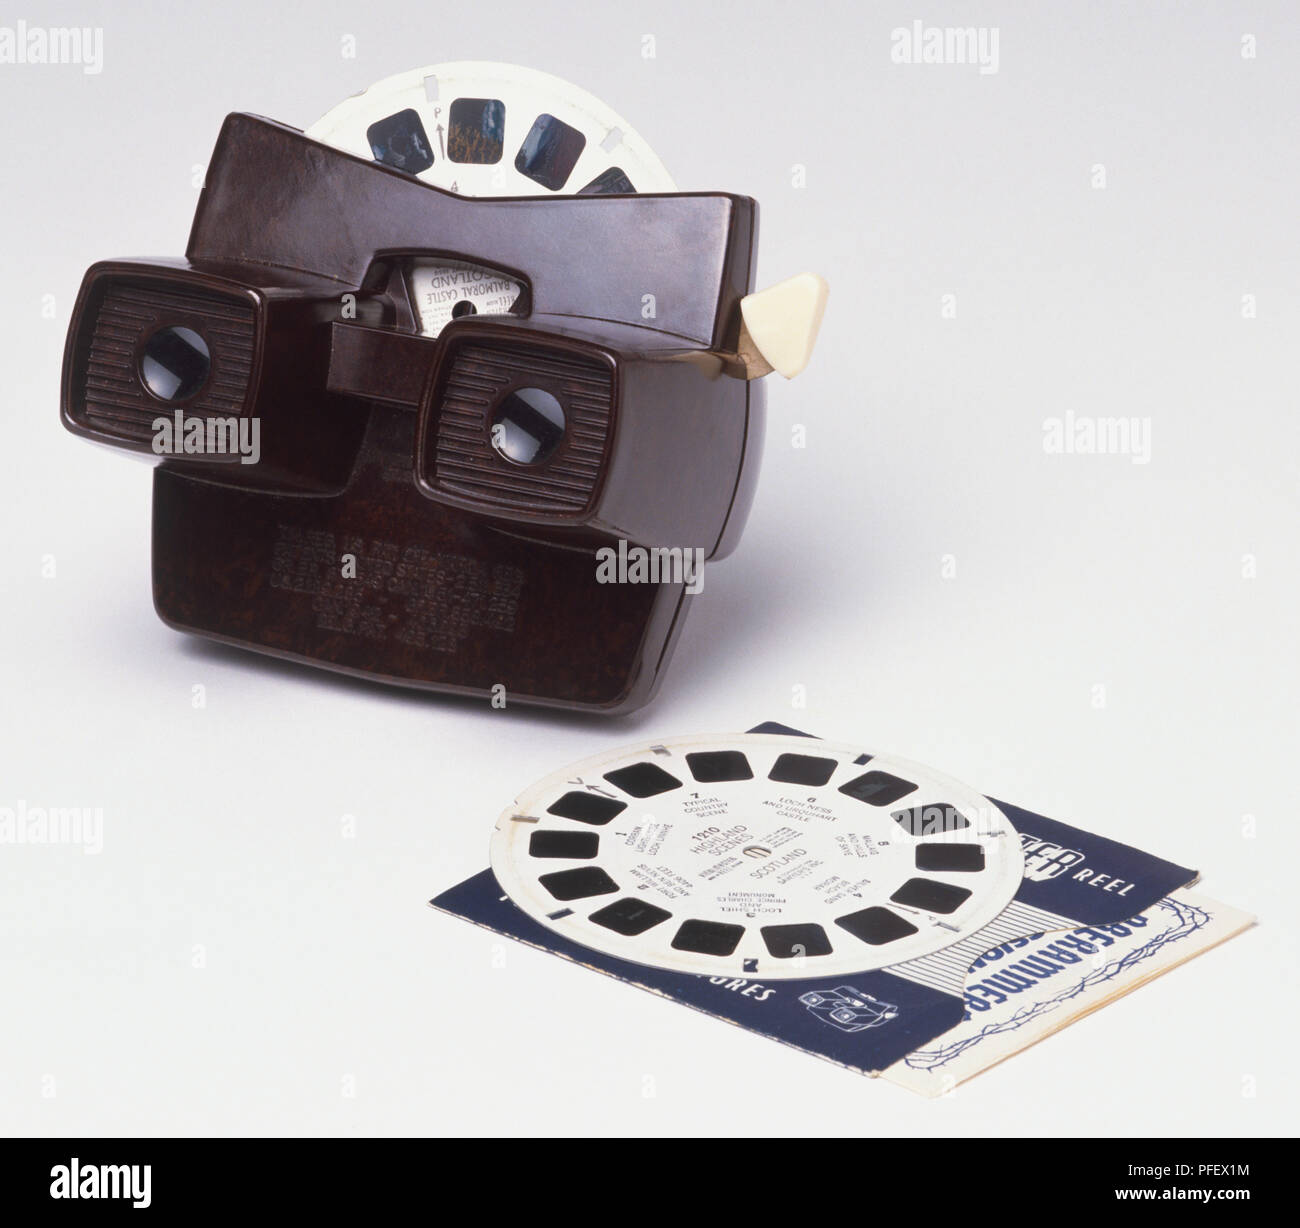 Toy camera with 3-D images on paper discs Stock Photo